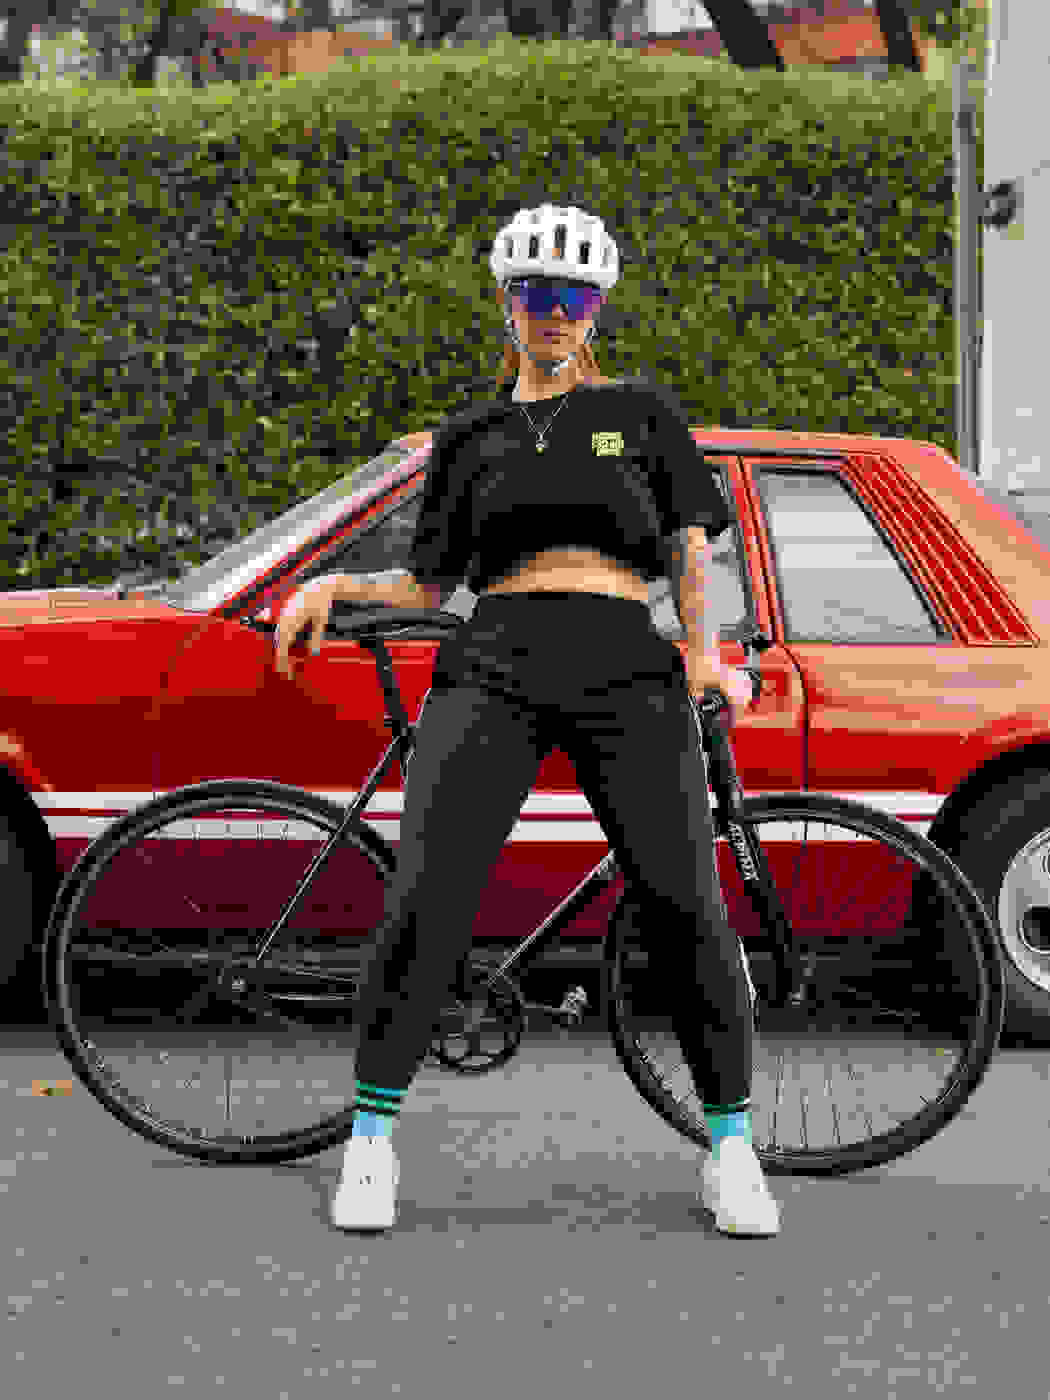 A woman stood in front of a bicycle with a red car in the background